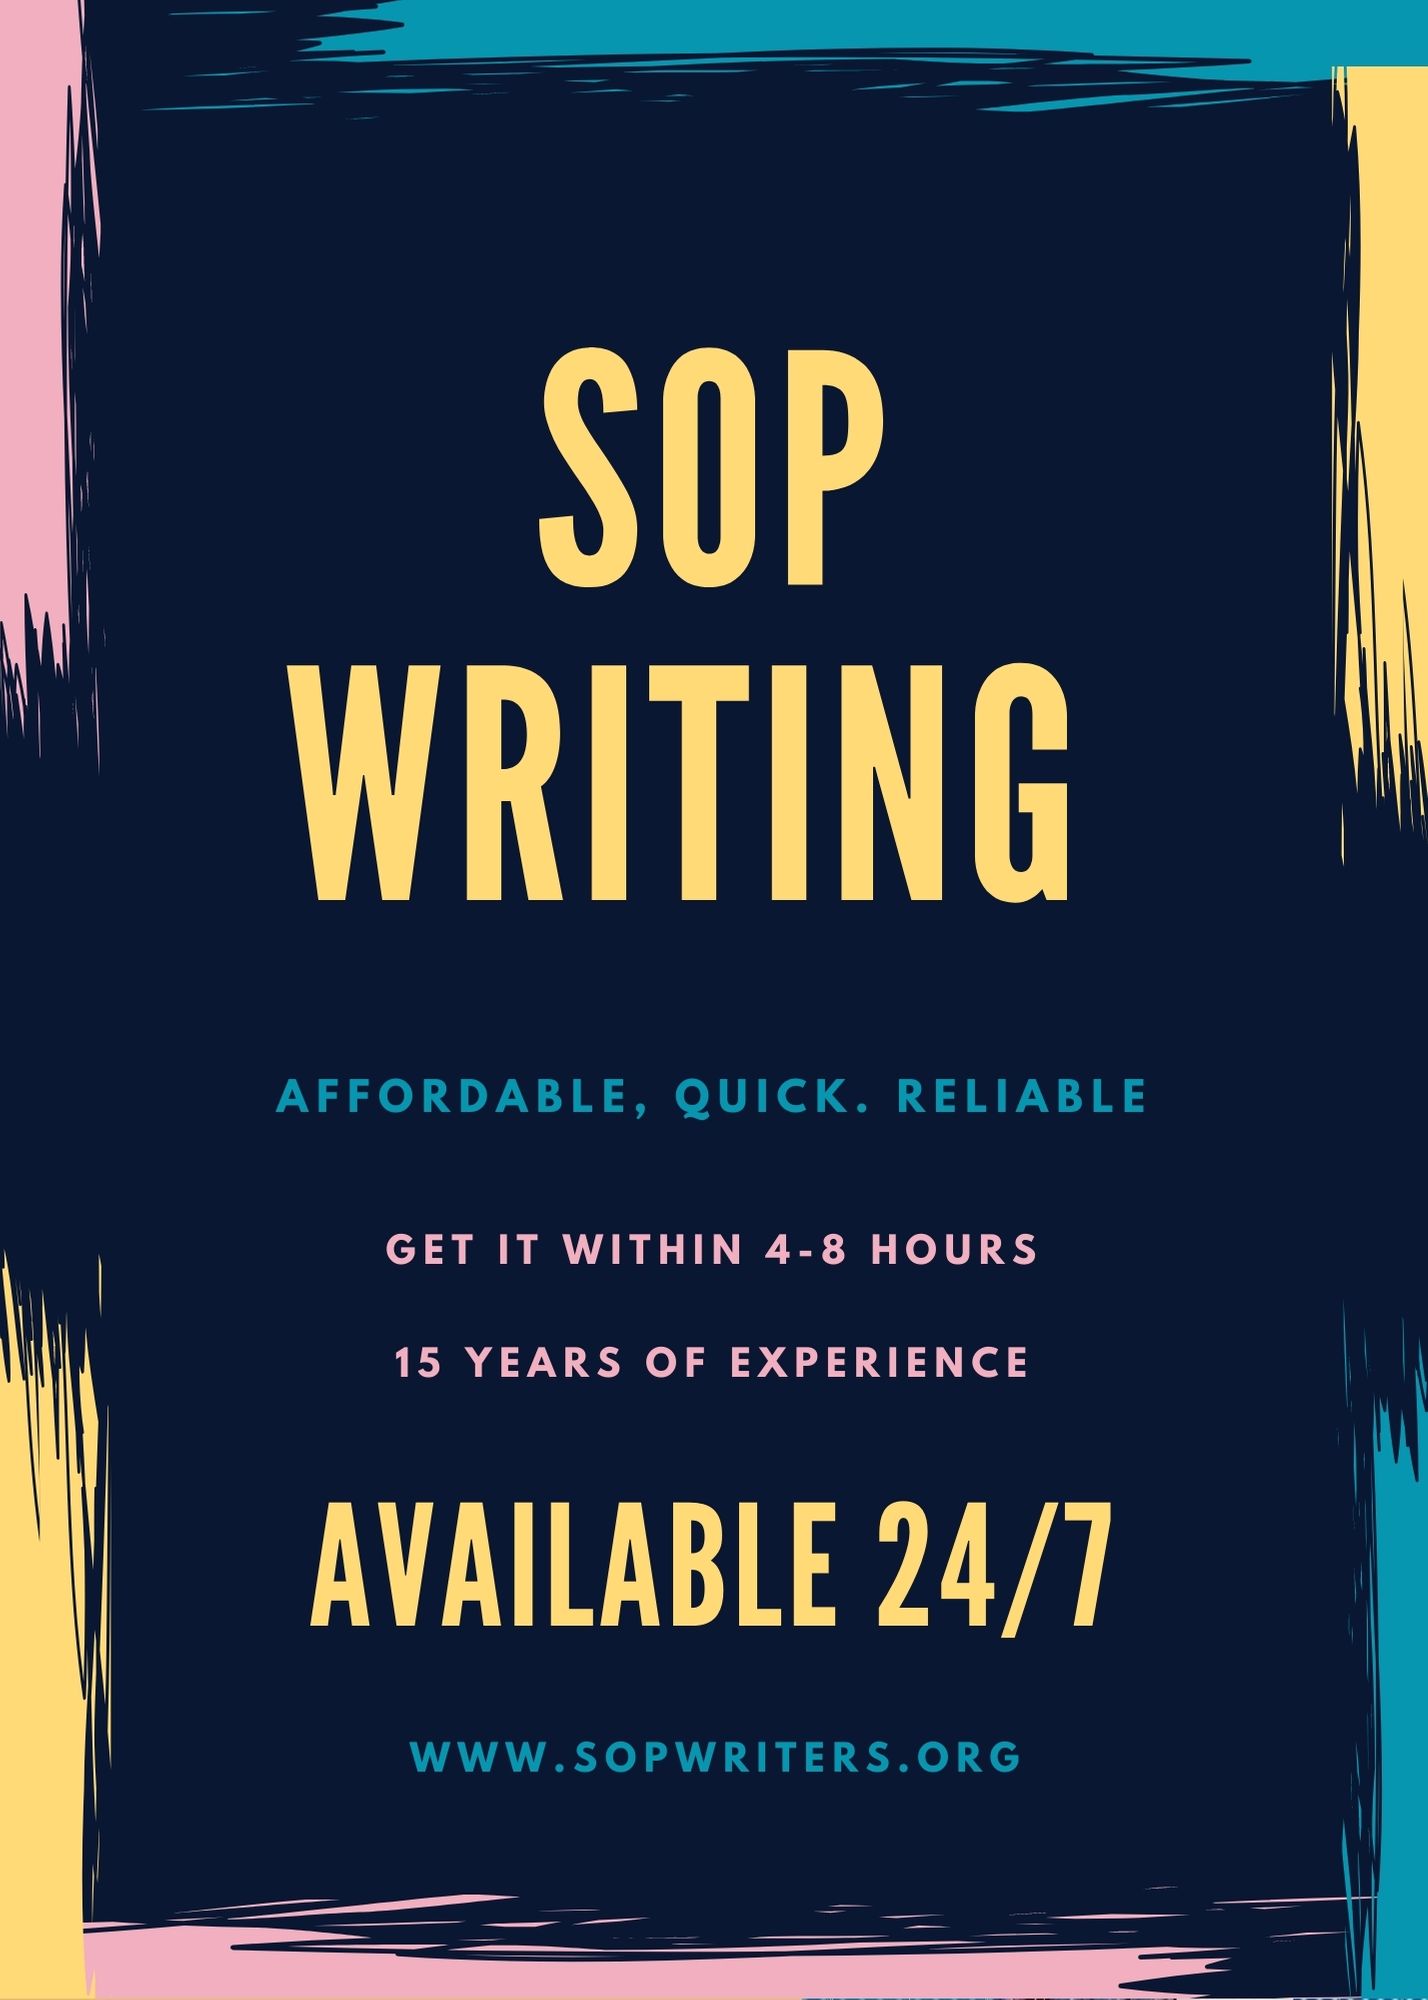 sop writing services usa